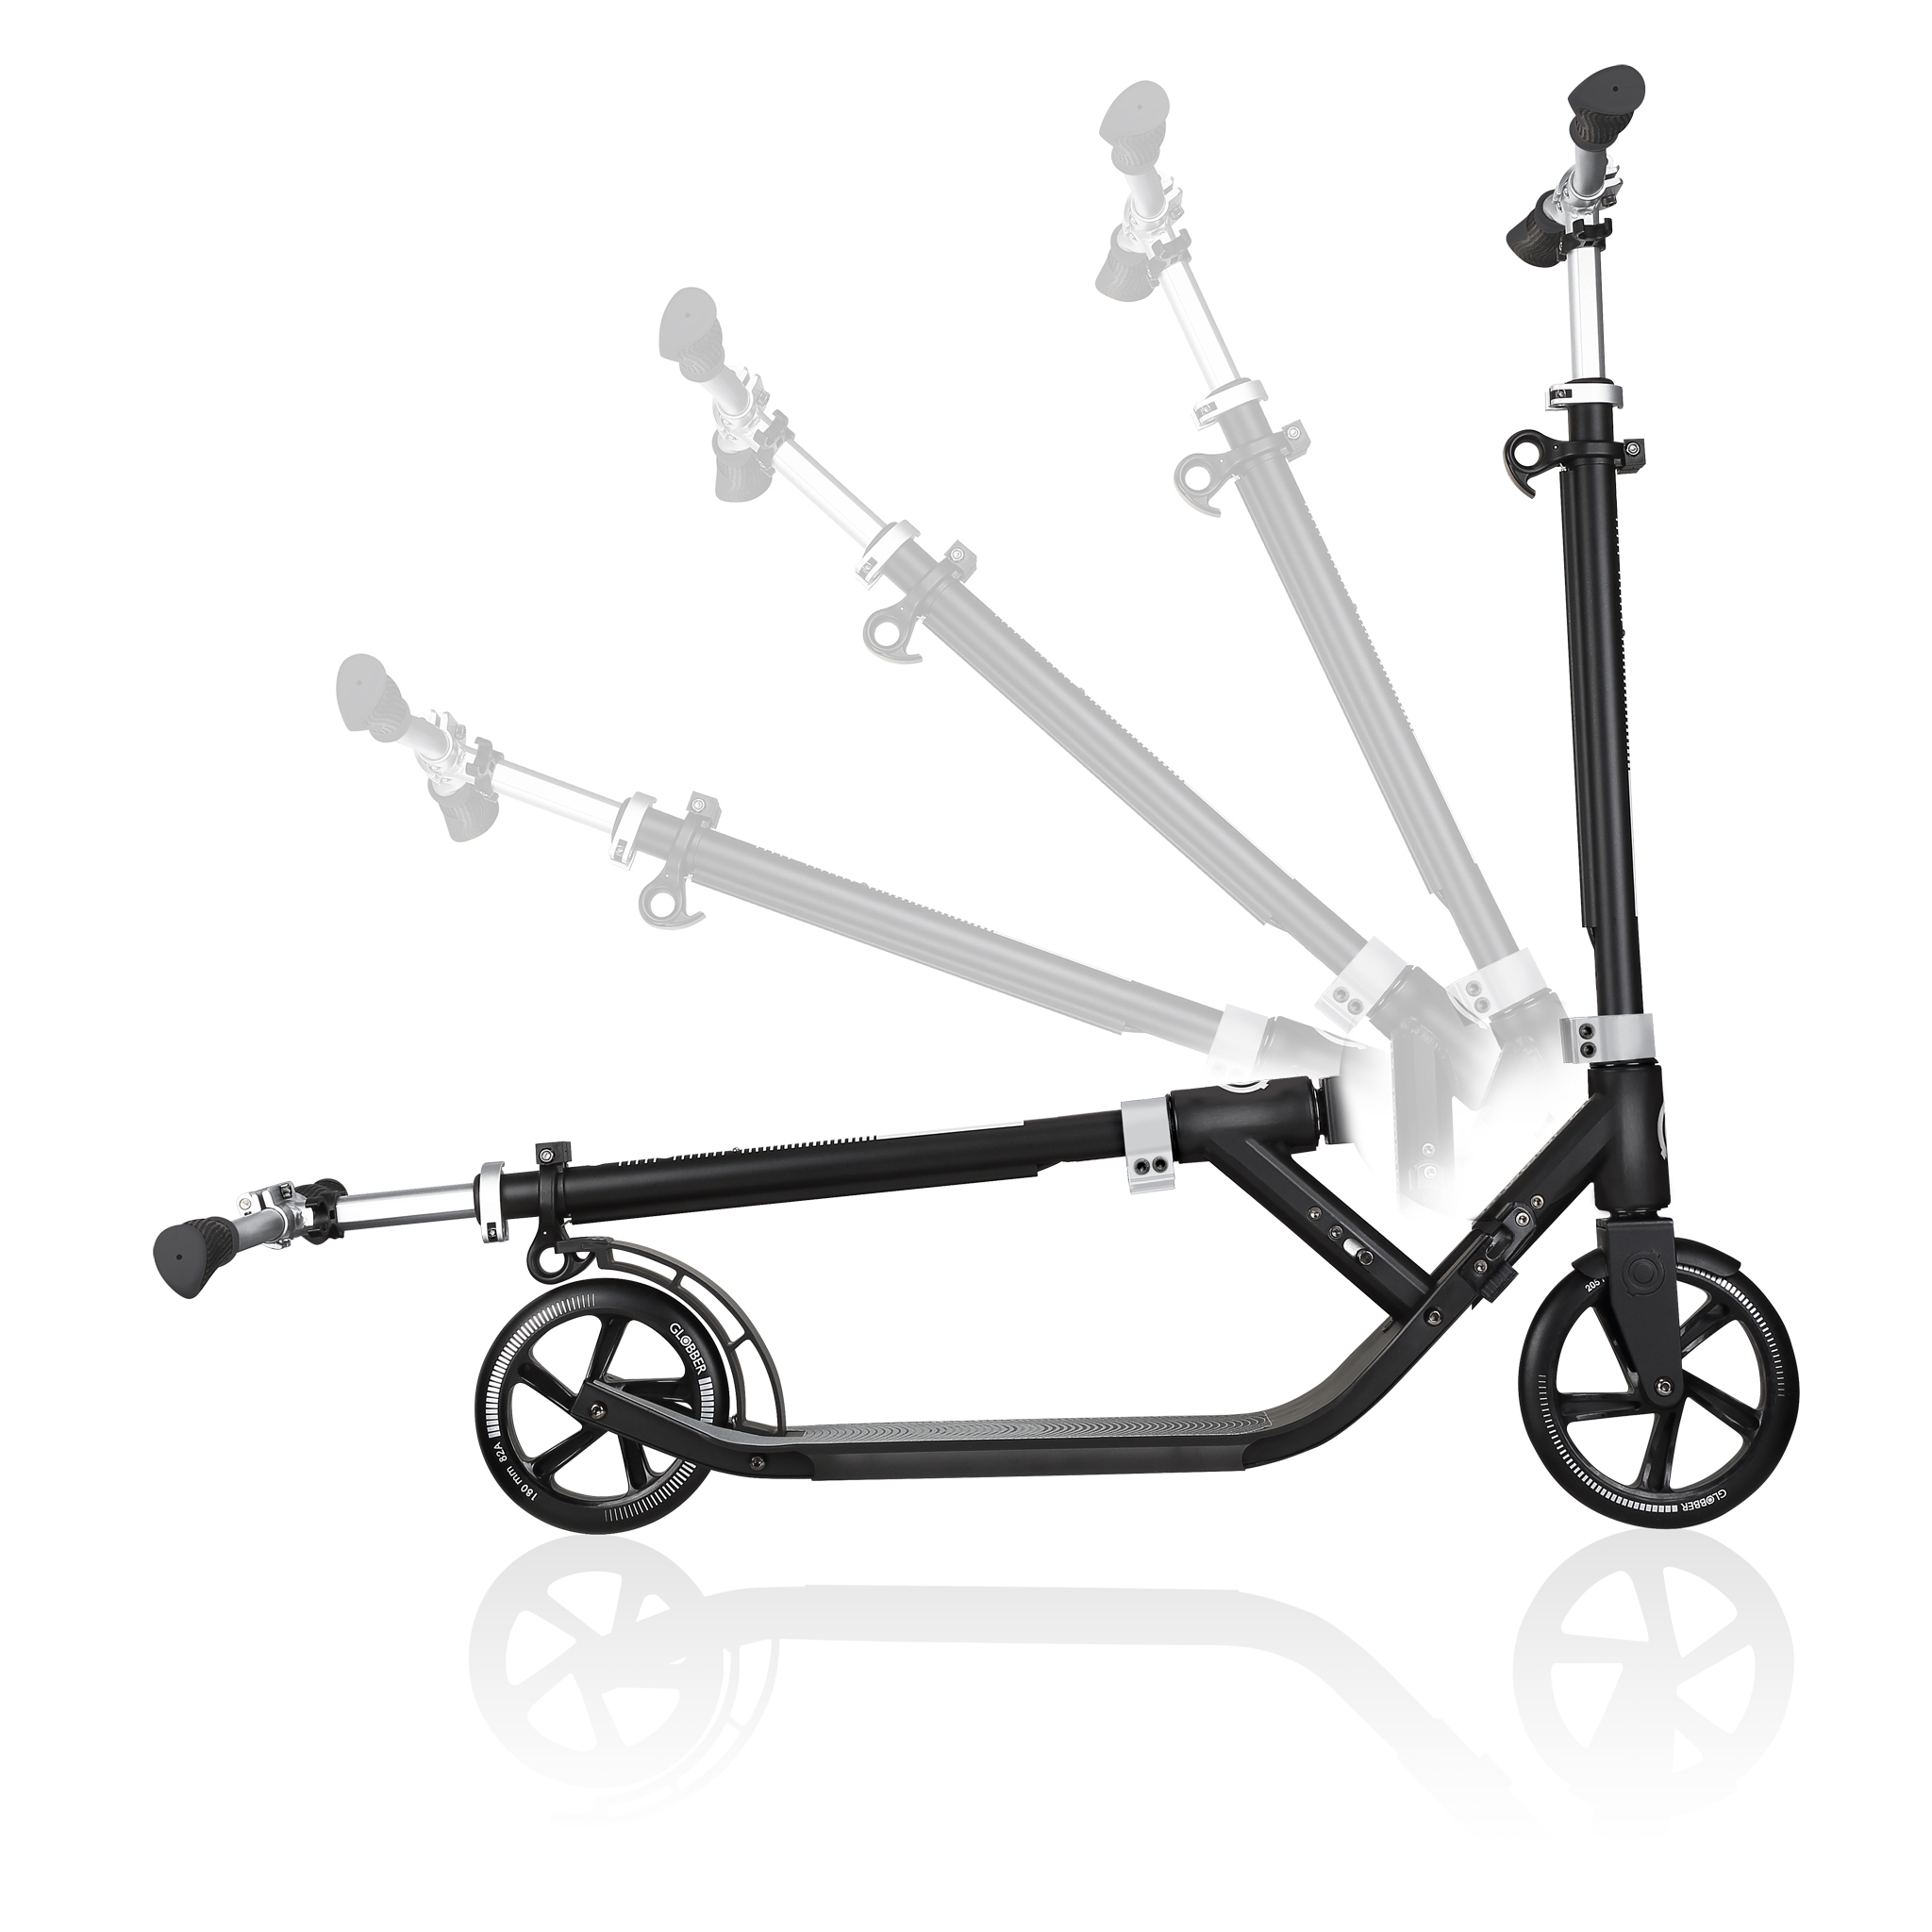 Globber-ONE-NL-205-180-DUO-2-wheel-foldable-scooter-for-adults-1-second-fold-up-scooter-lead-grey 2